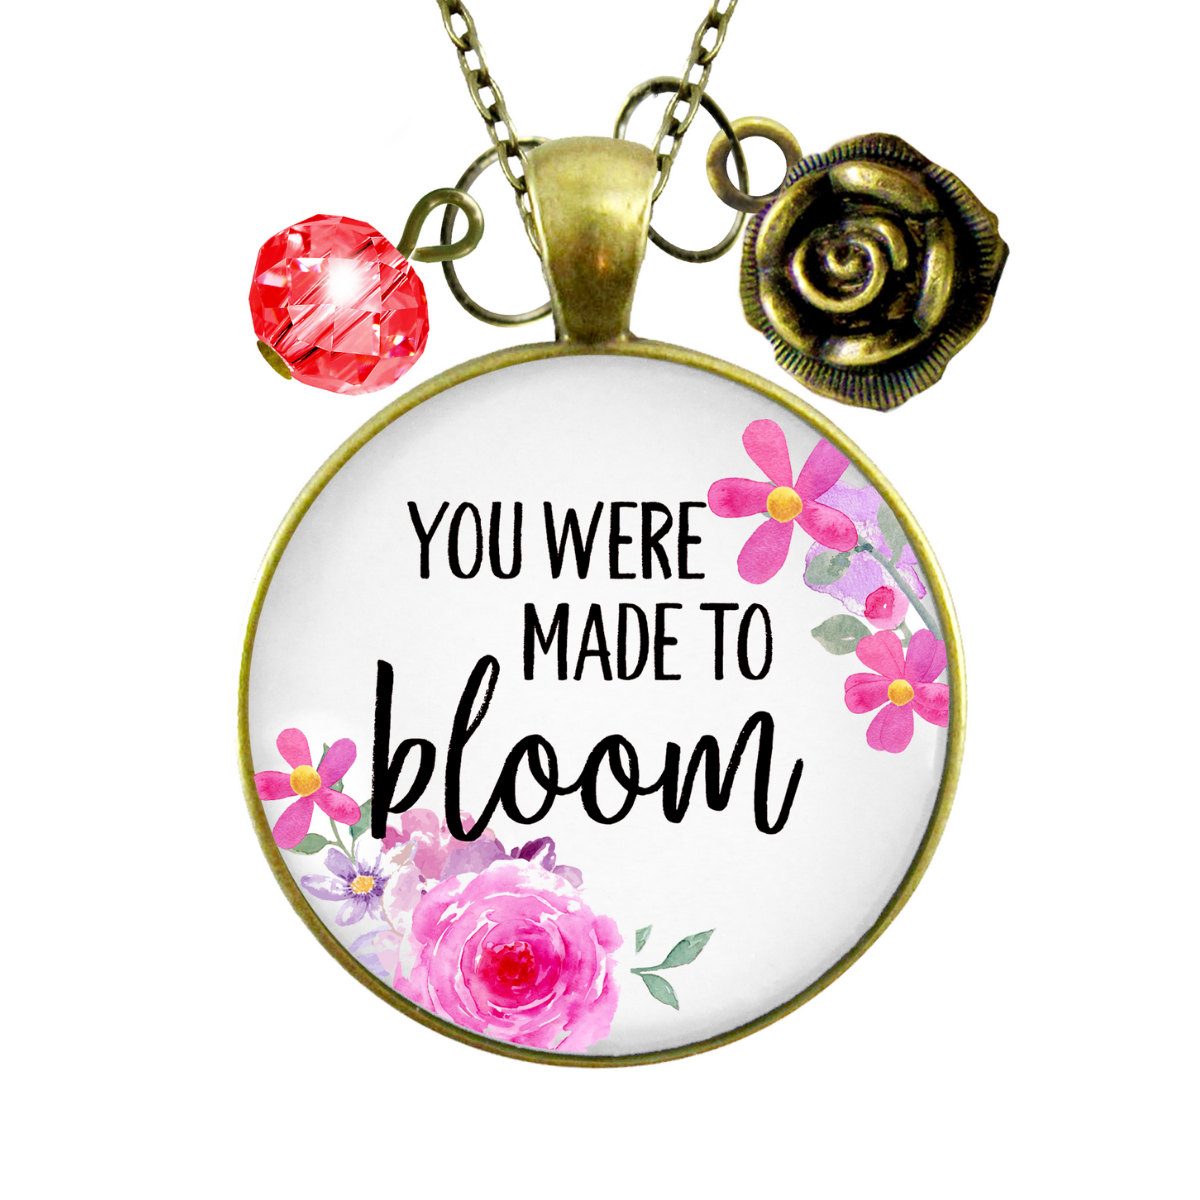 Gutsy Goodness You Were Made To Bloom Necklace Watercolor Floral Inspiring Gift - Gutsy Goodness Handmade Jewelry;You Were Made To Bloom Necklace Watercolor Floral Inspiring Gift - Gutsy Goodness Handmade Jewelry Gifts